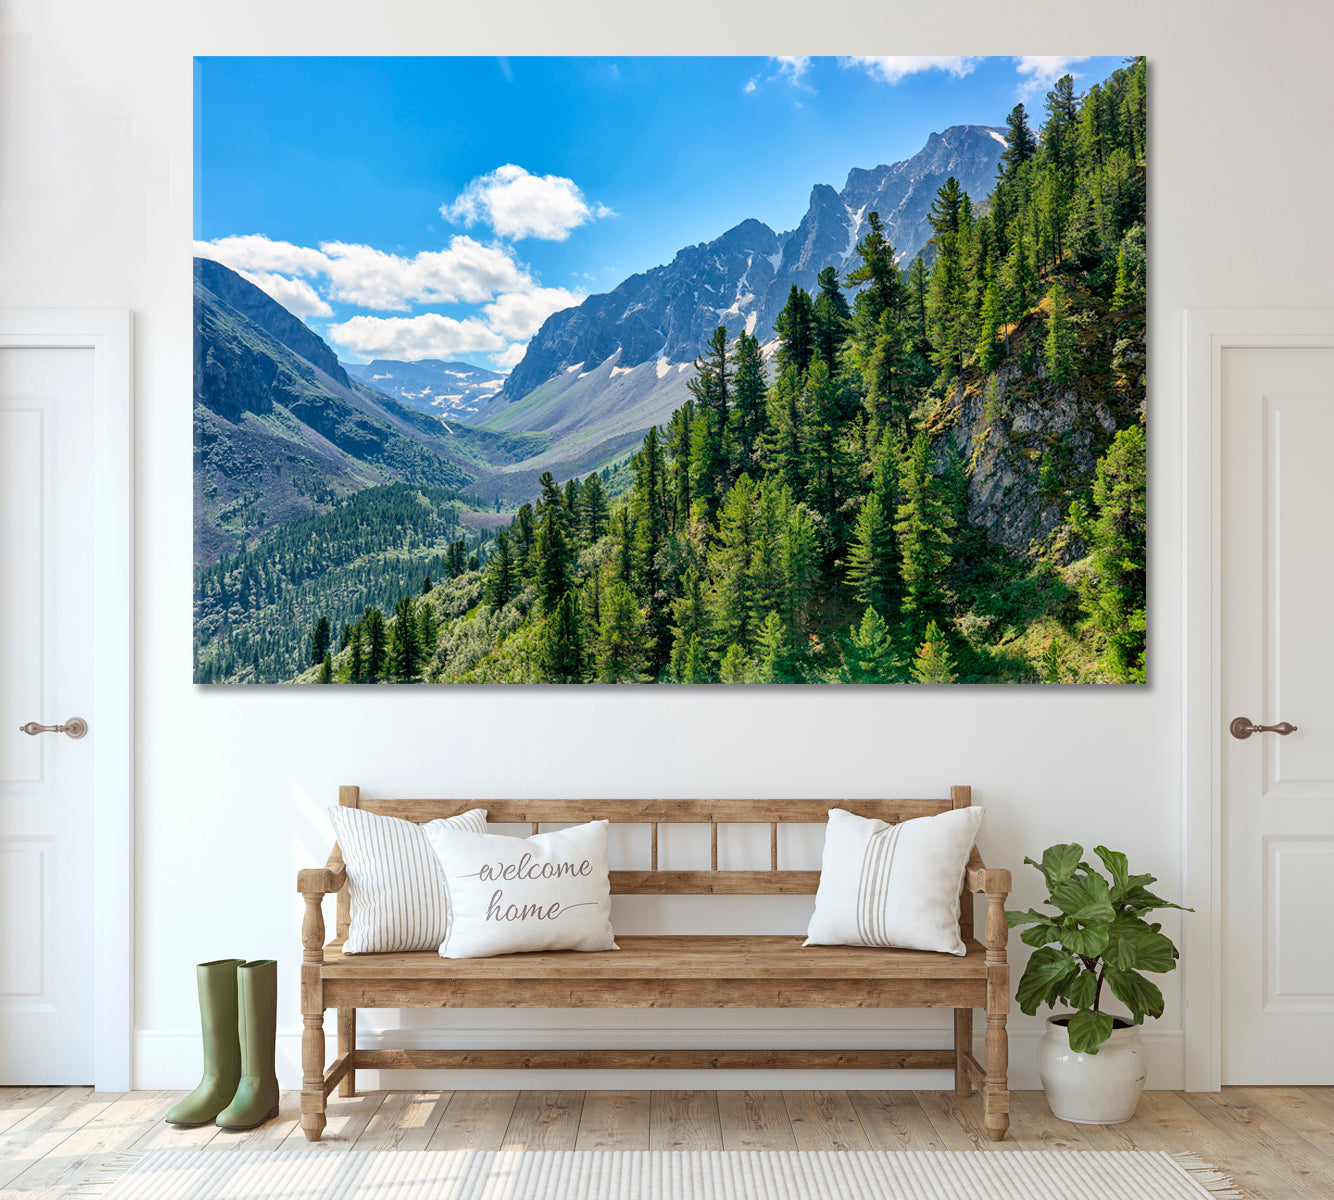 Pine Forest on Mountainside Canvas Print ArtLexy 1 Panel 24"x16" inches 